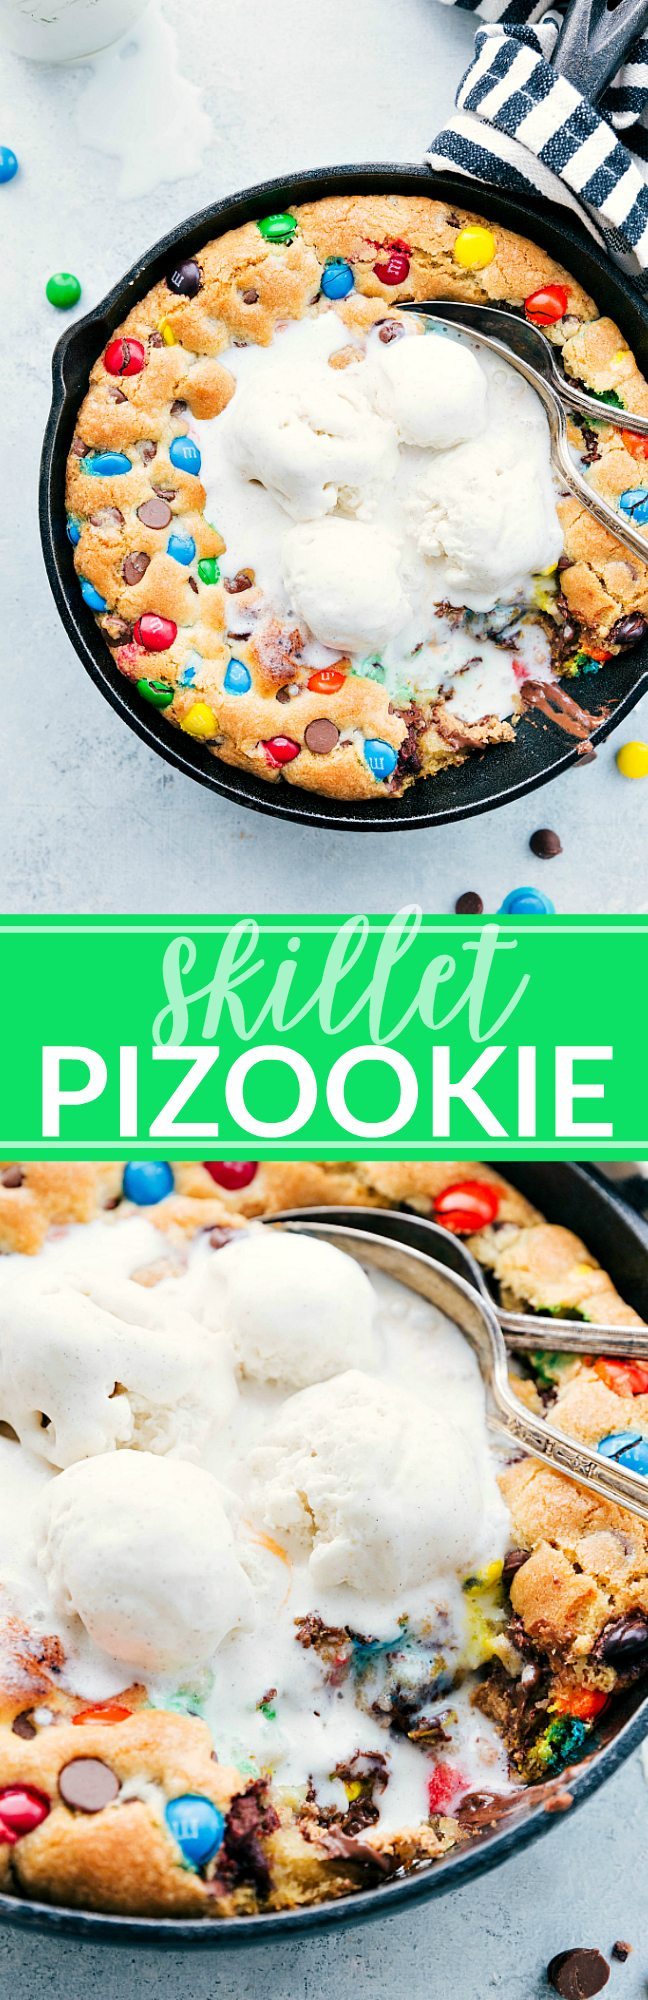 The ultimate BEST EVER PIZOOKIE! This skillet cookie is so easy to make and delicious! | chelseasmessyapron.com | #dessert #skillet #cookie #pizookie #kidfriendly #cazookie #easy #quick #chocolate #valentines #treat